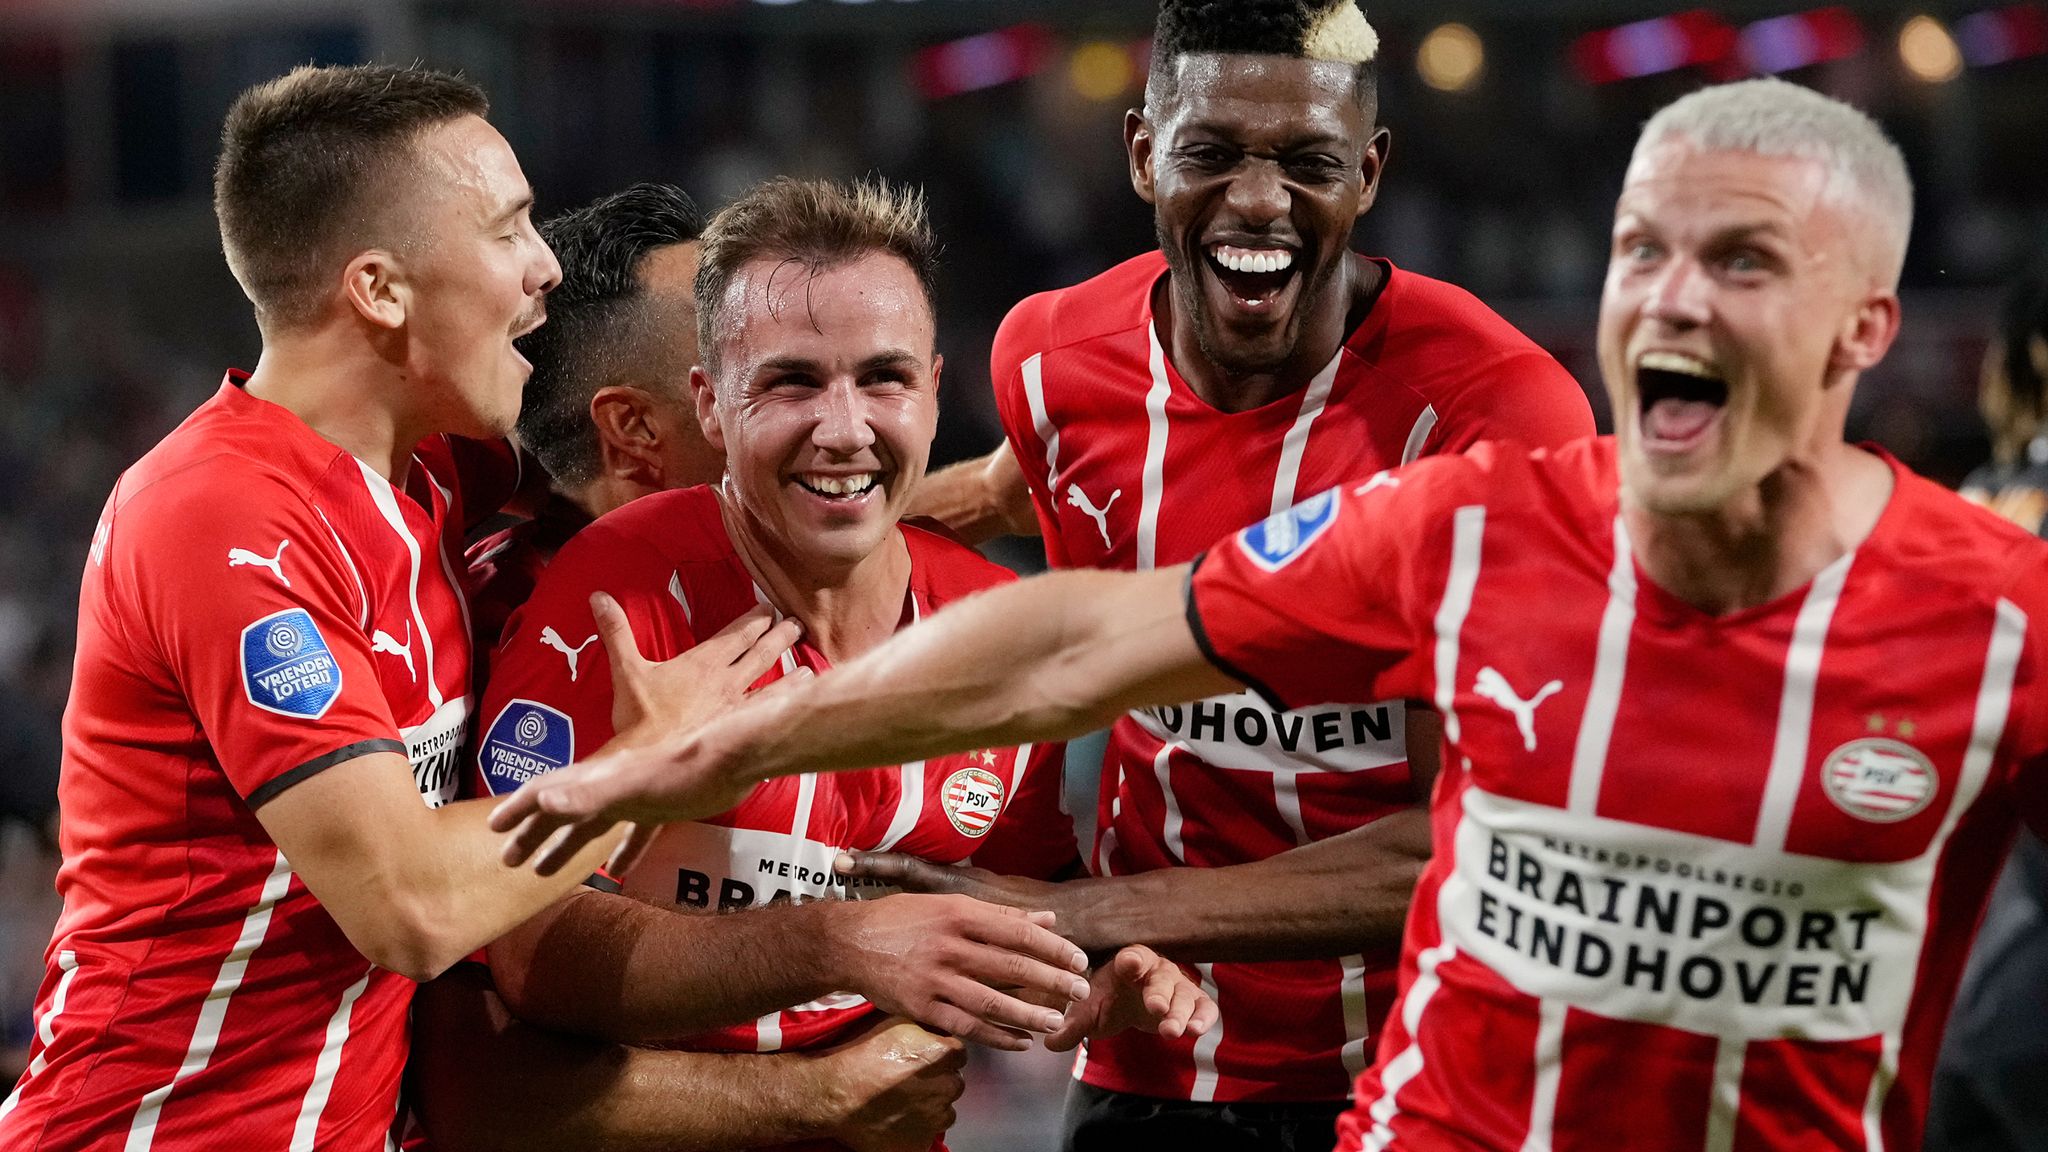 Champions League qualifying: PSV thrash Galatasaray in the first leg - Celtic or Midtjylland up next | Football News | Sky Sports